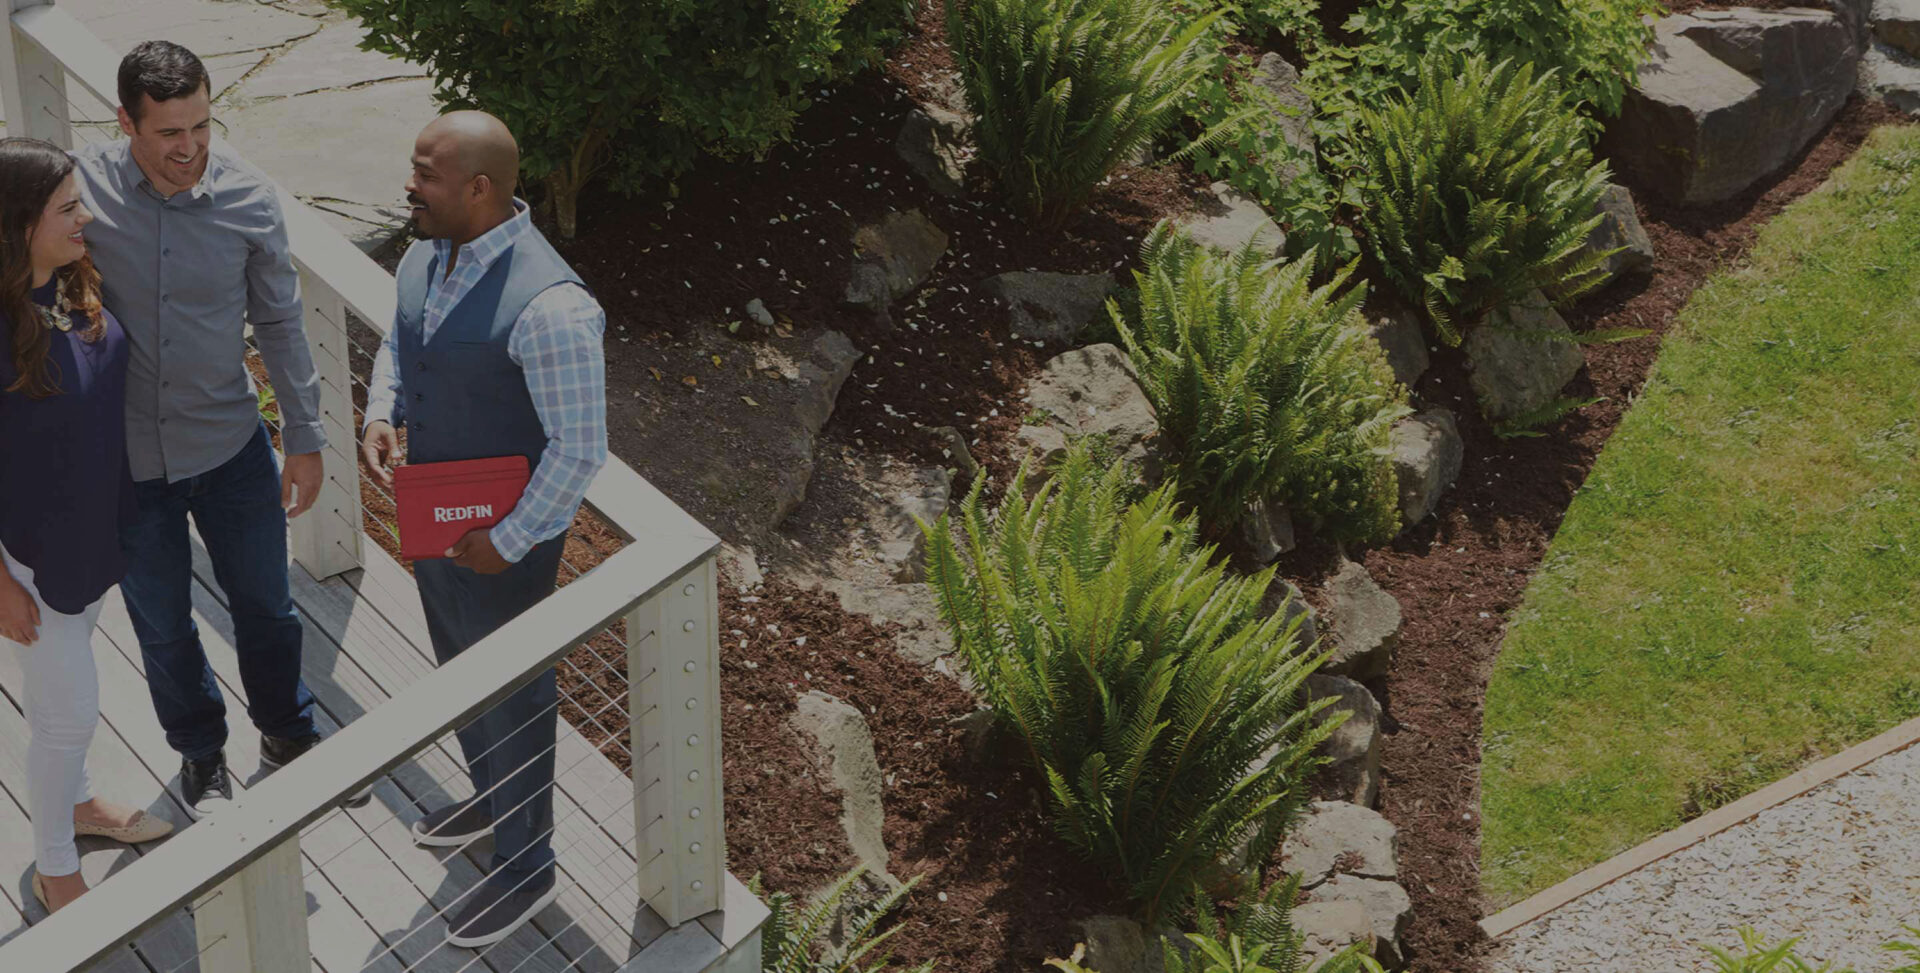 photo of realtor holding Redfin folder talking to couple on a balcony above a landscaped yard